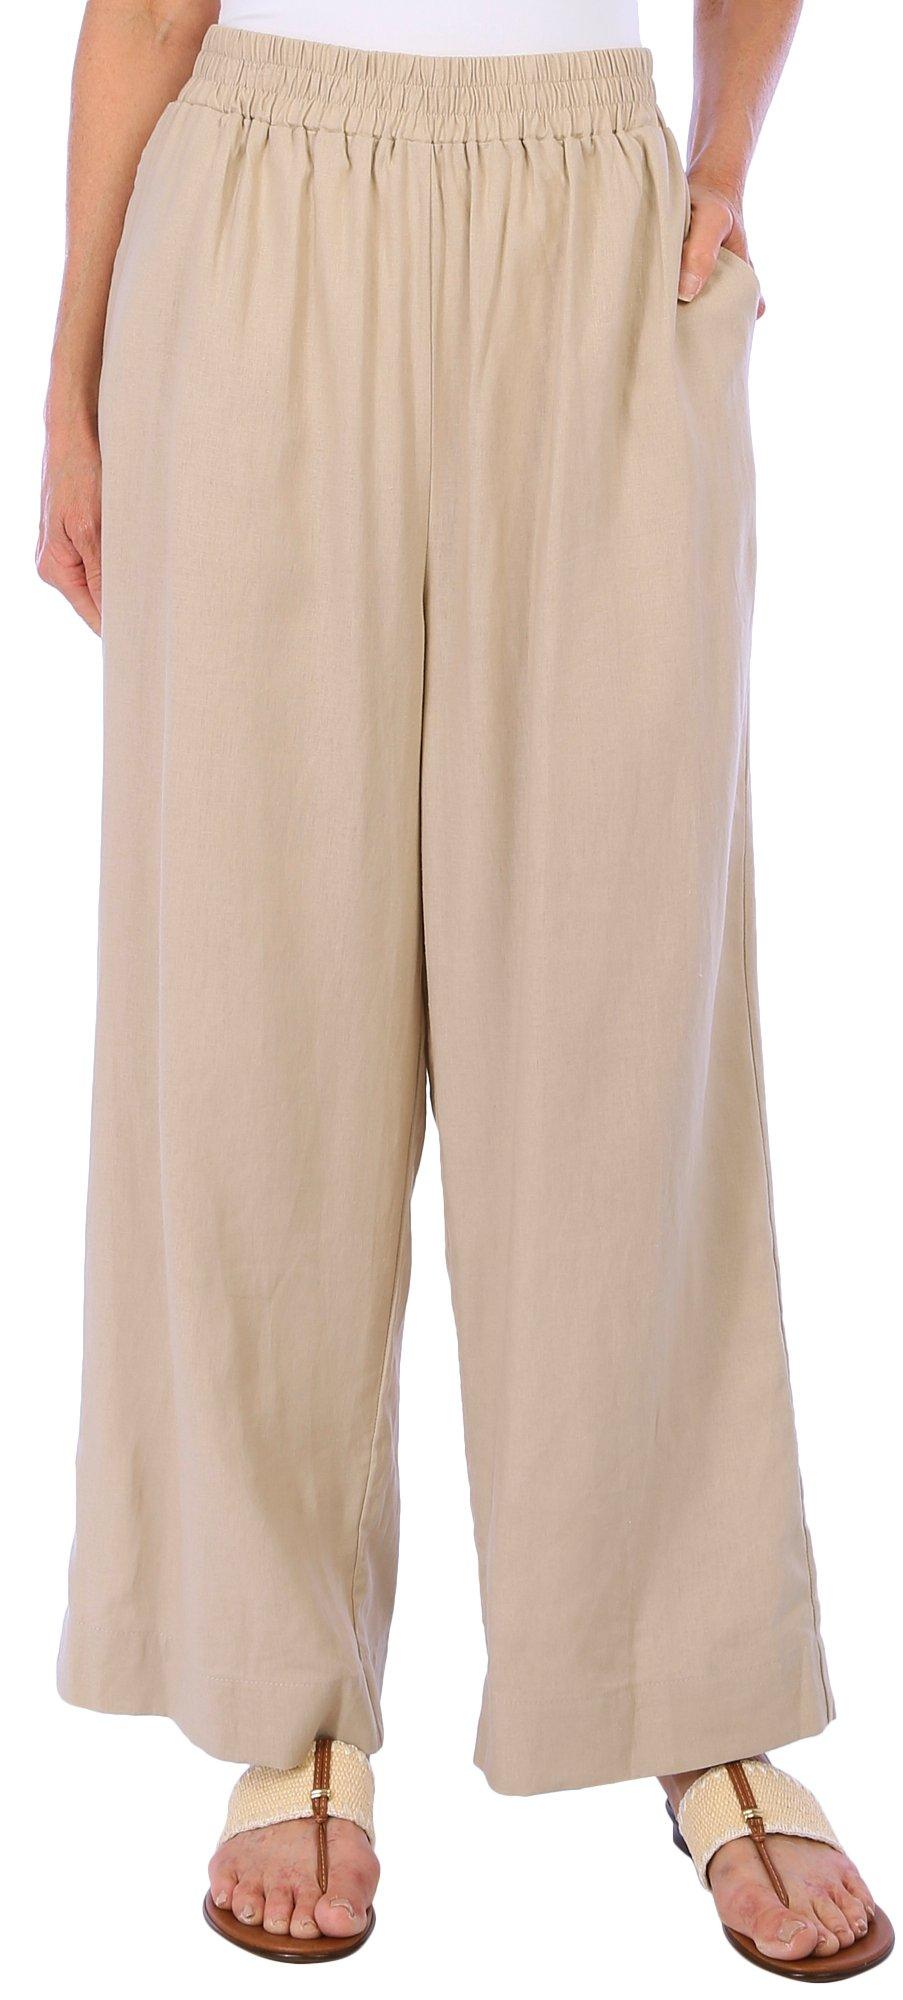 Sunny Leigh Womens Solid Linen Pants